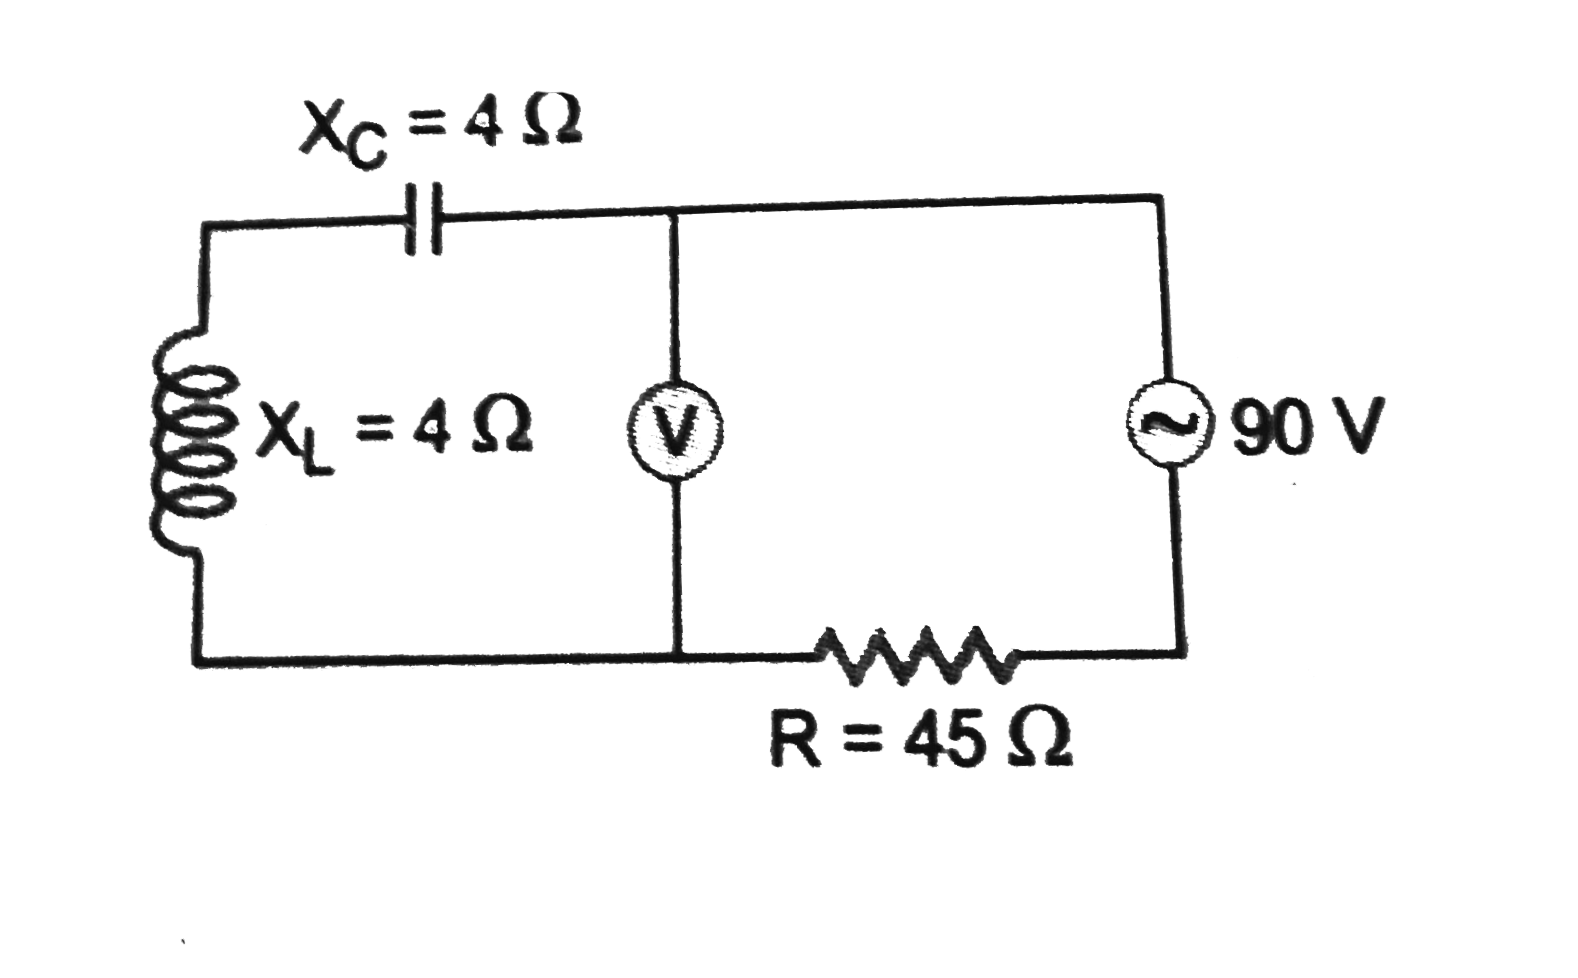 What will be the reading in the voltmeter and ammeter of the circuit shown in fig.